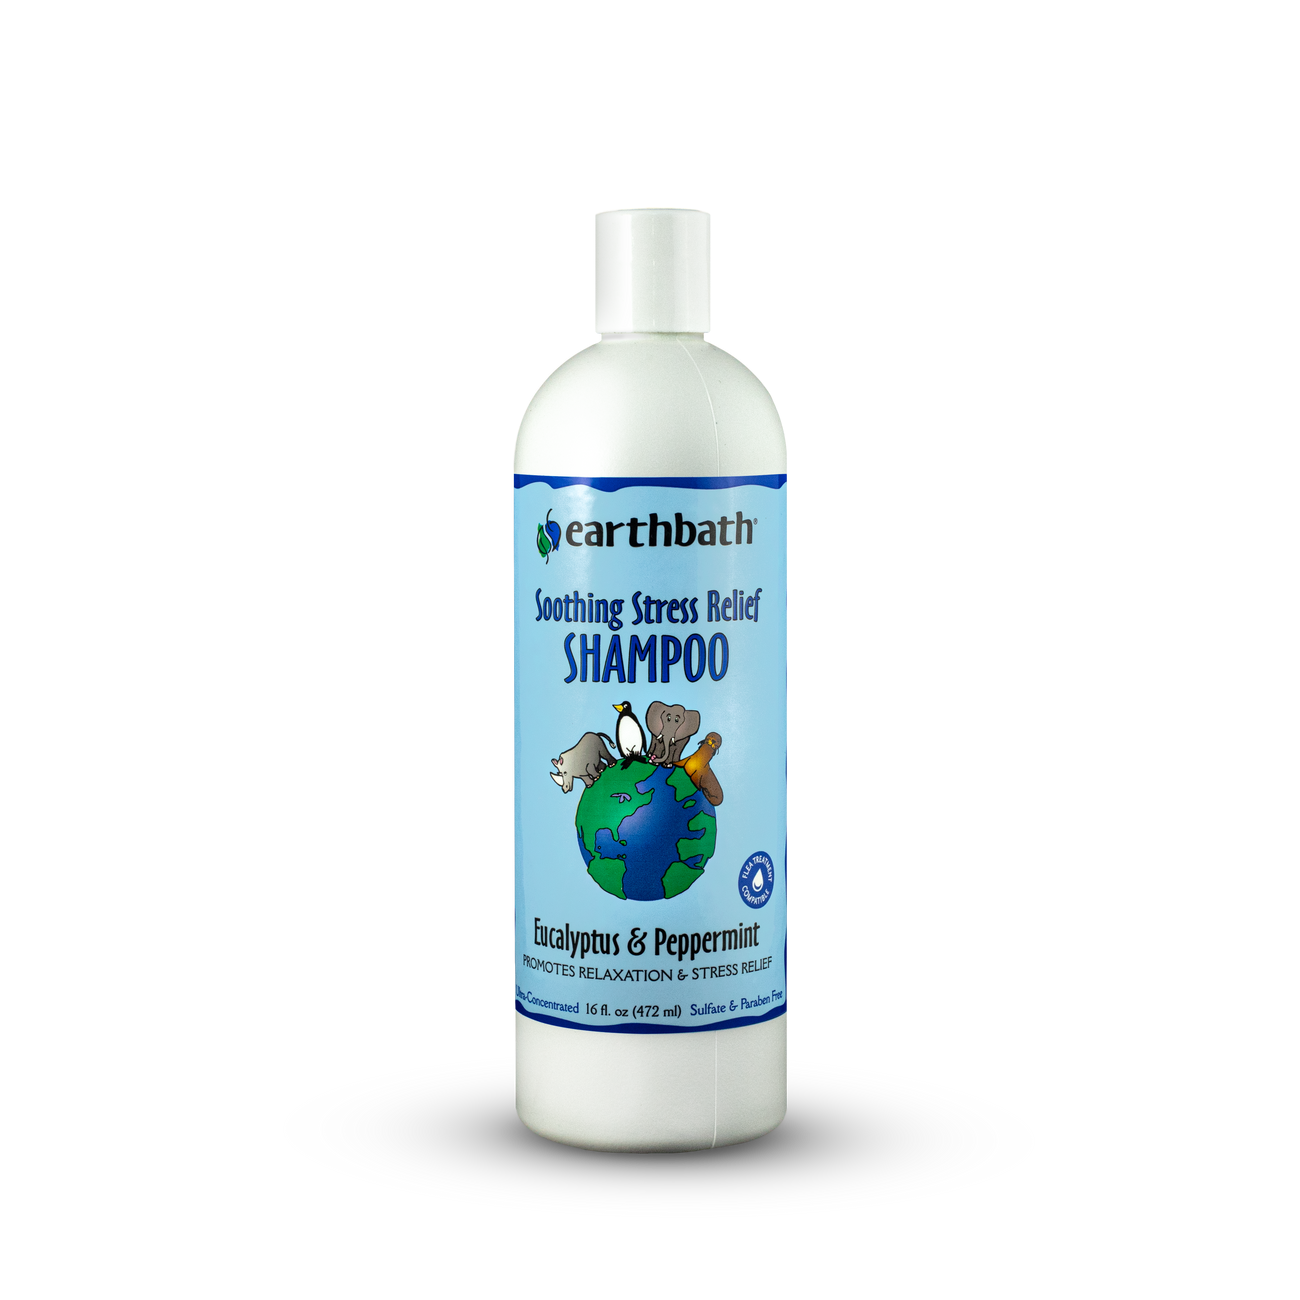 Soothing Relief Shampoo, Eucalyptus & Peppermint, Promotes Relaxation & Stress Relief